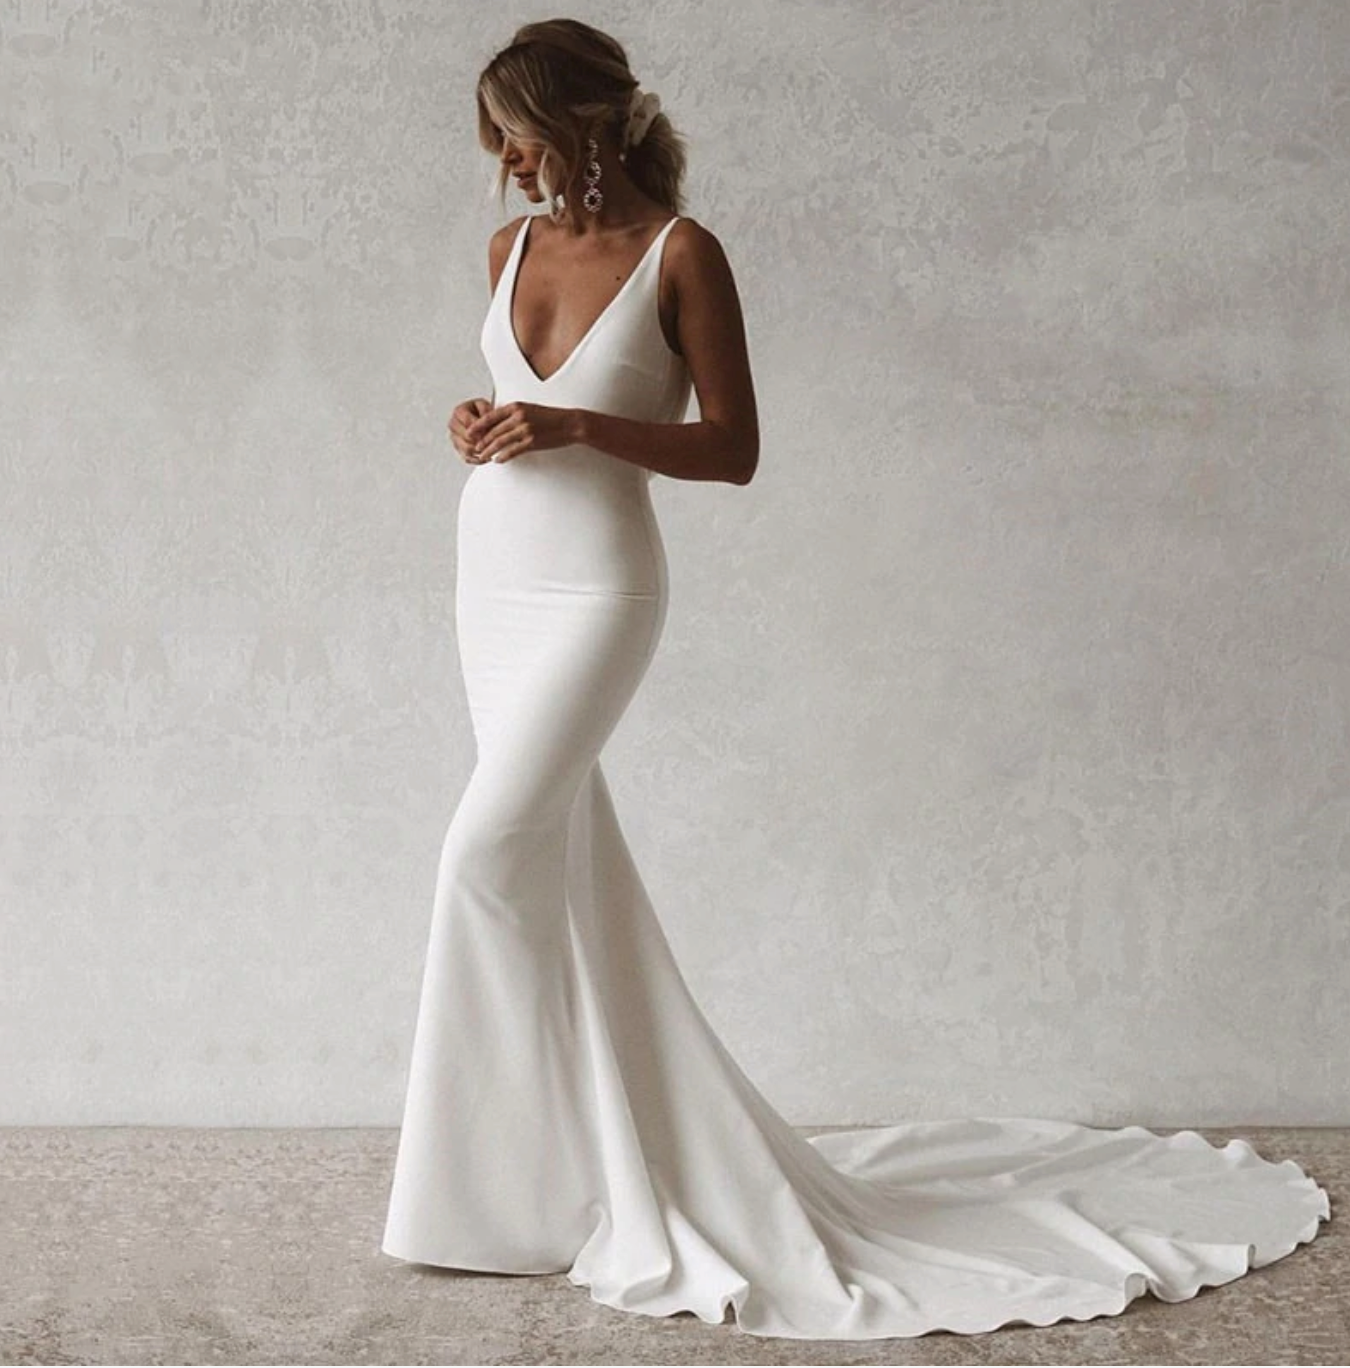 What Are The Length Differences Between Wedding Dress Trains?